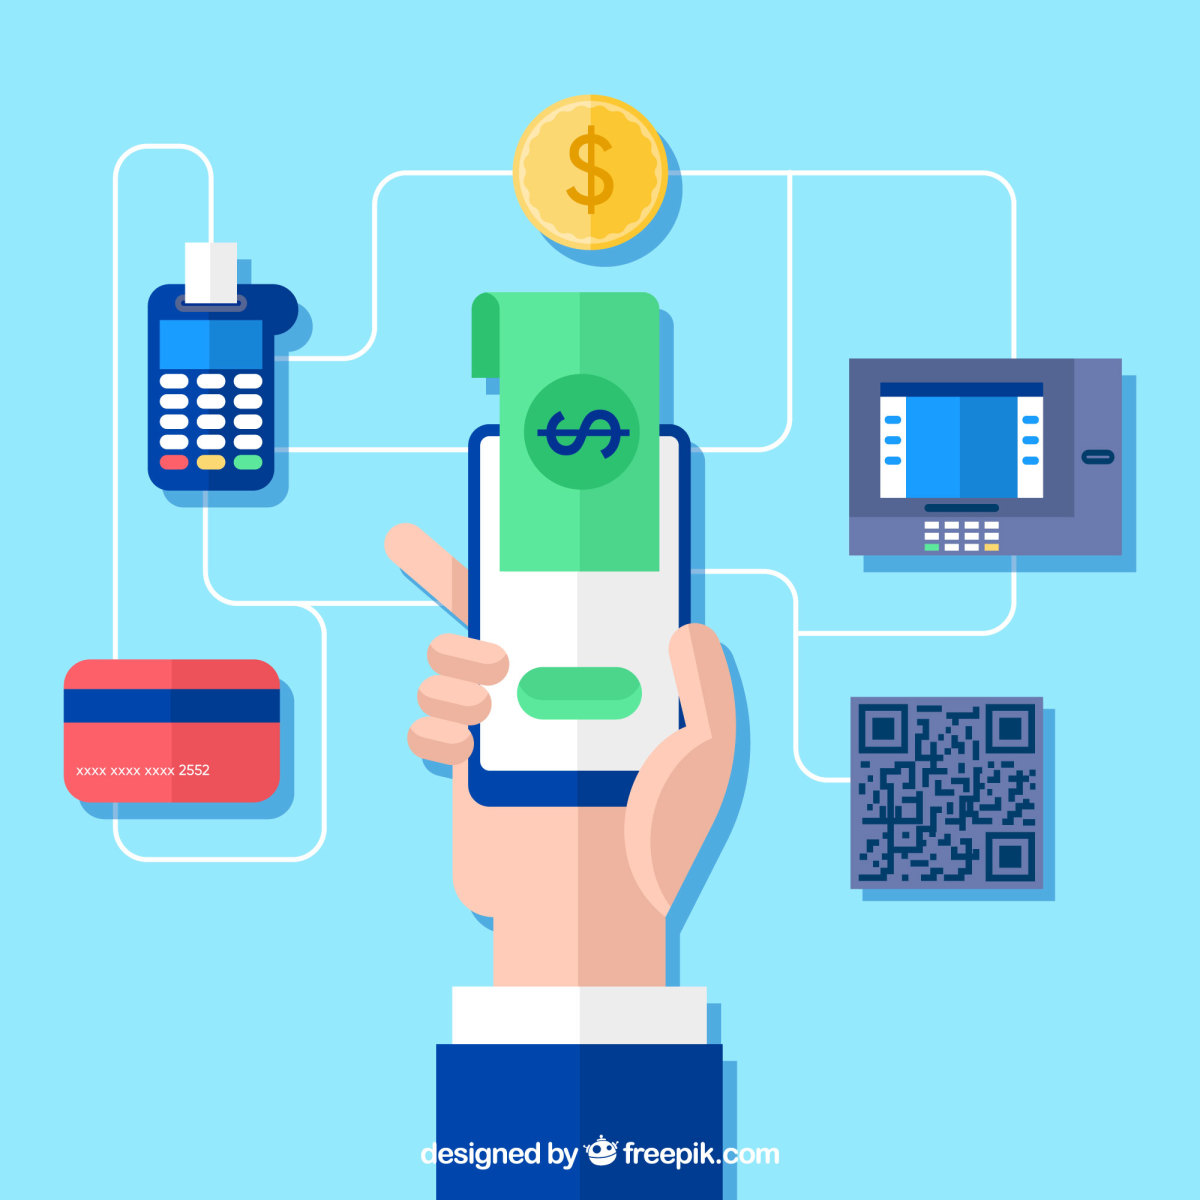 How Electronic Payments Changed The Retail Payment Scenario